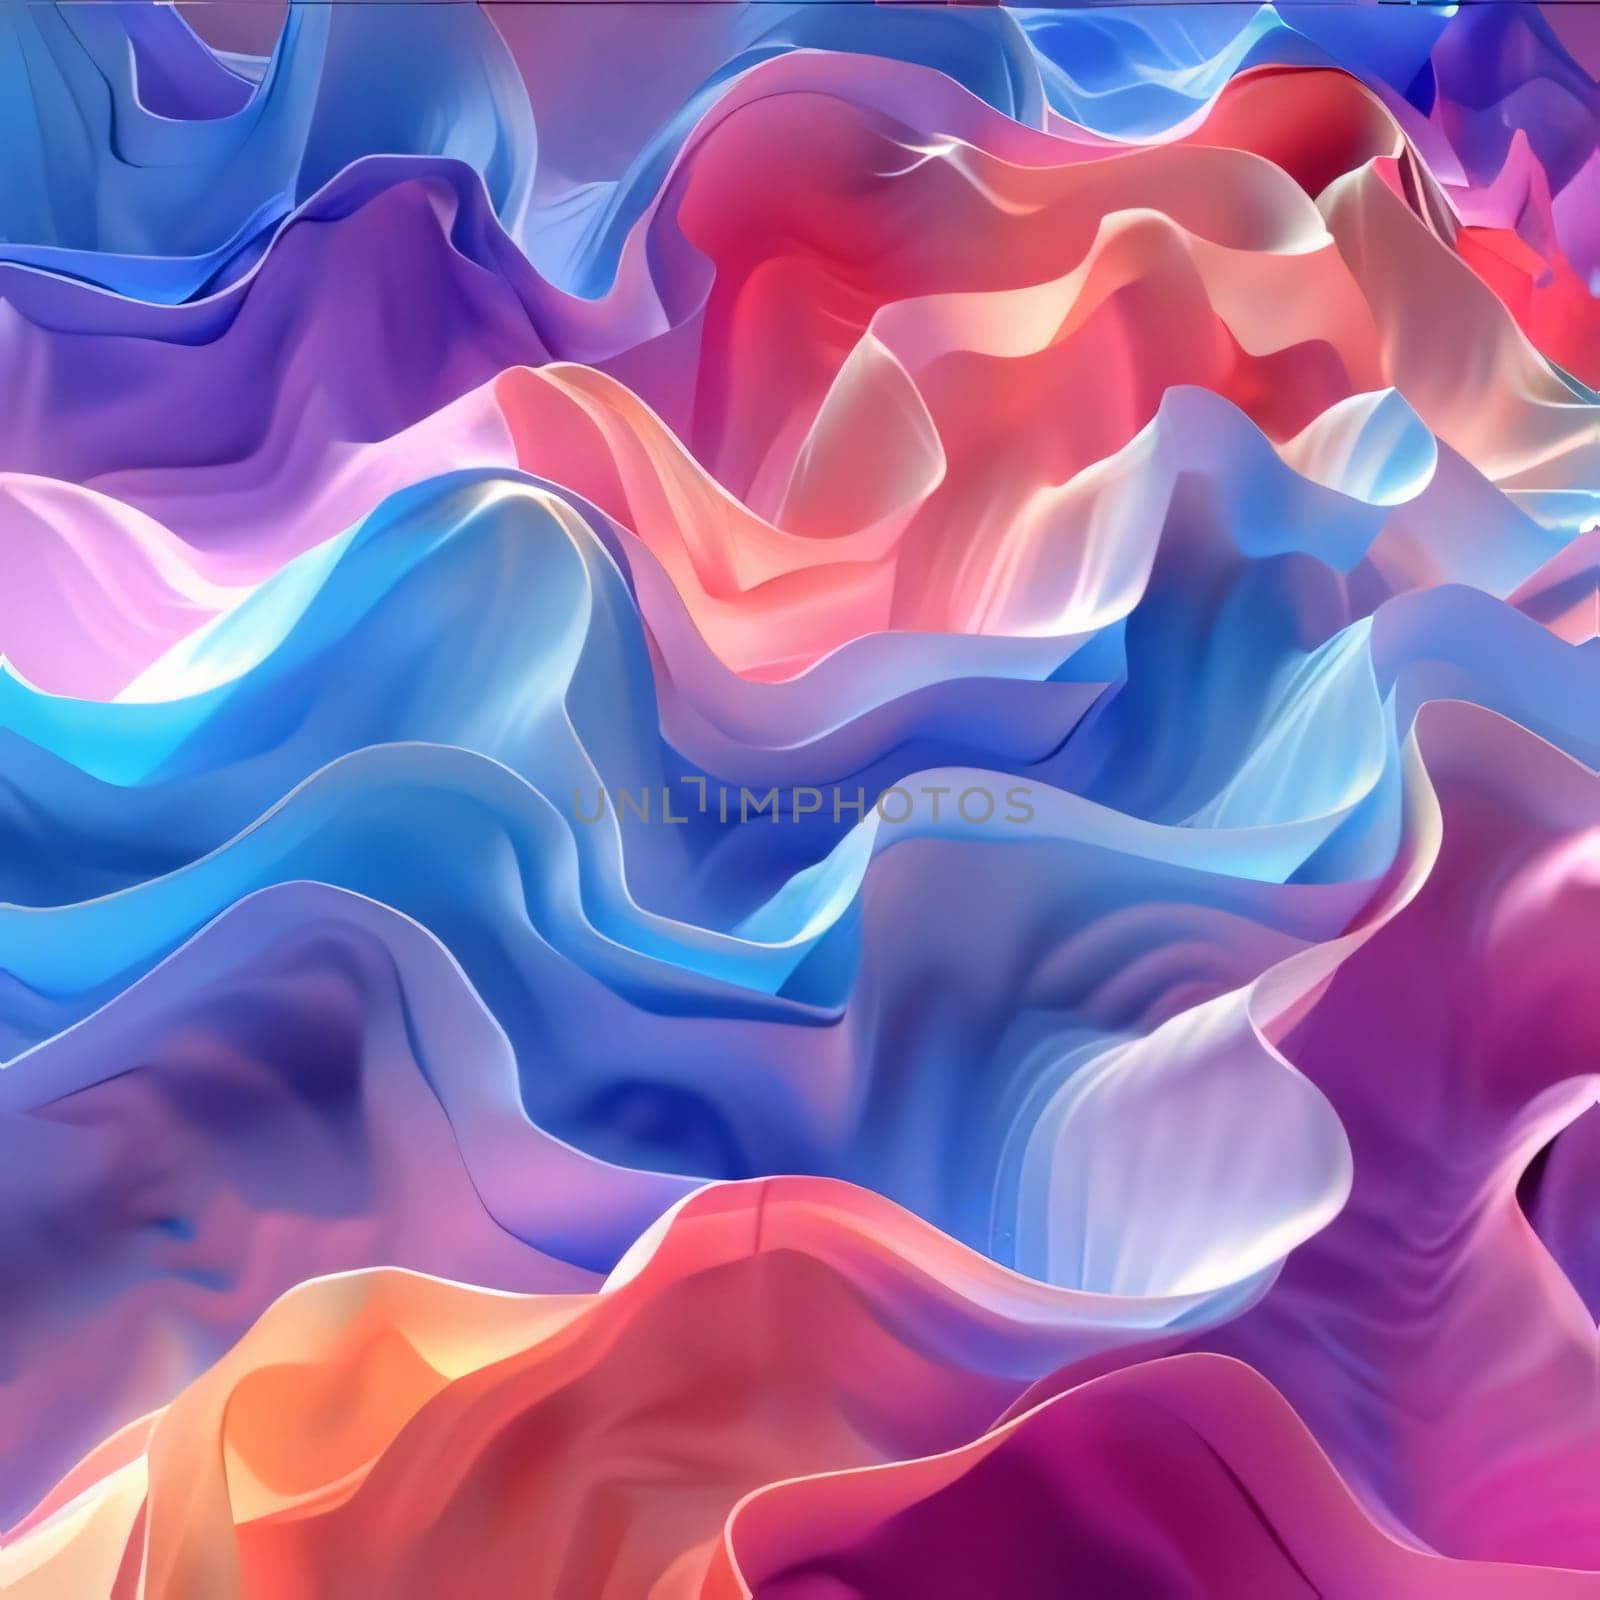 Abstract background design: Abstract background with wavy pattern. 3d rendering, 3d illustration.